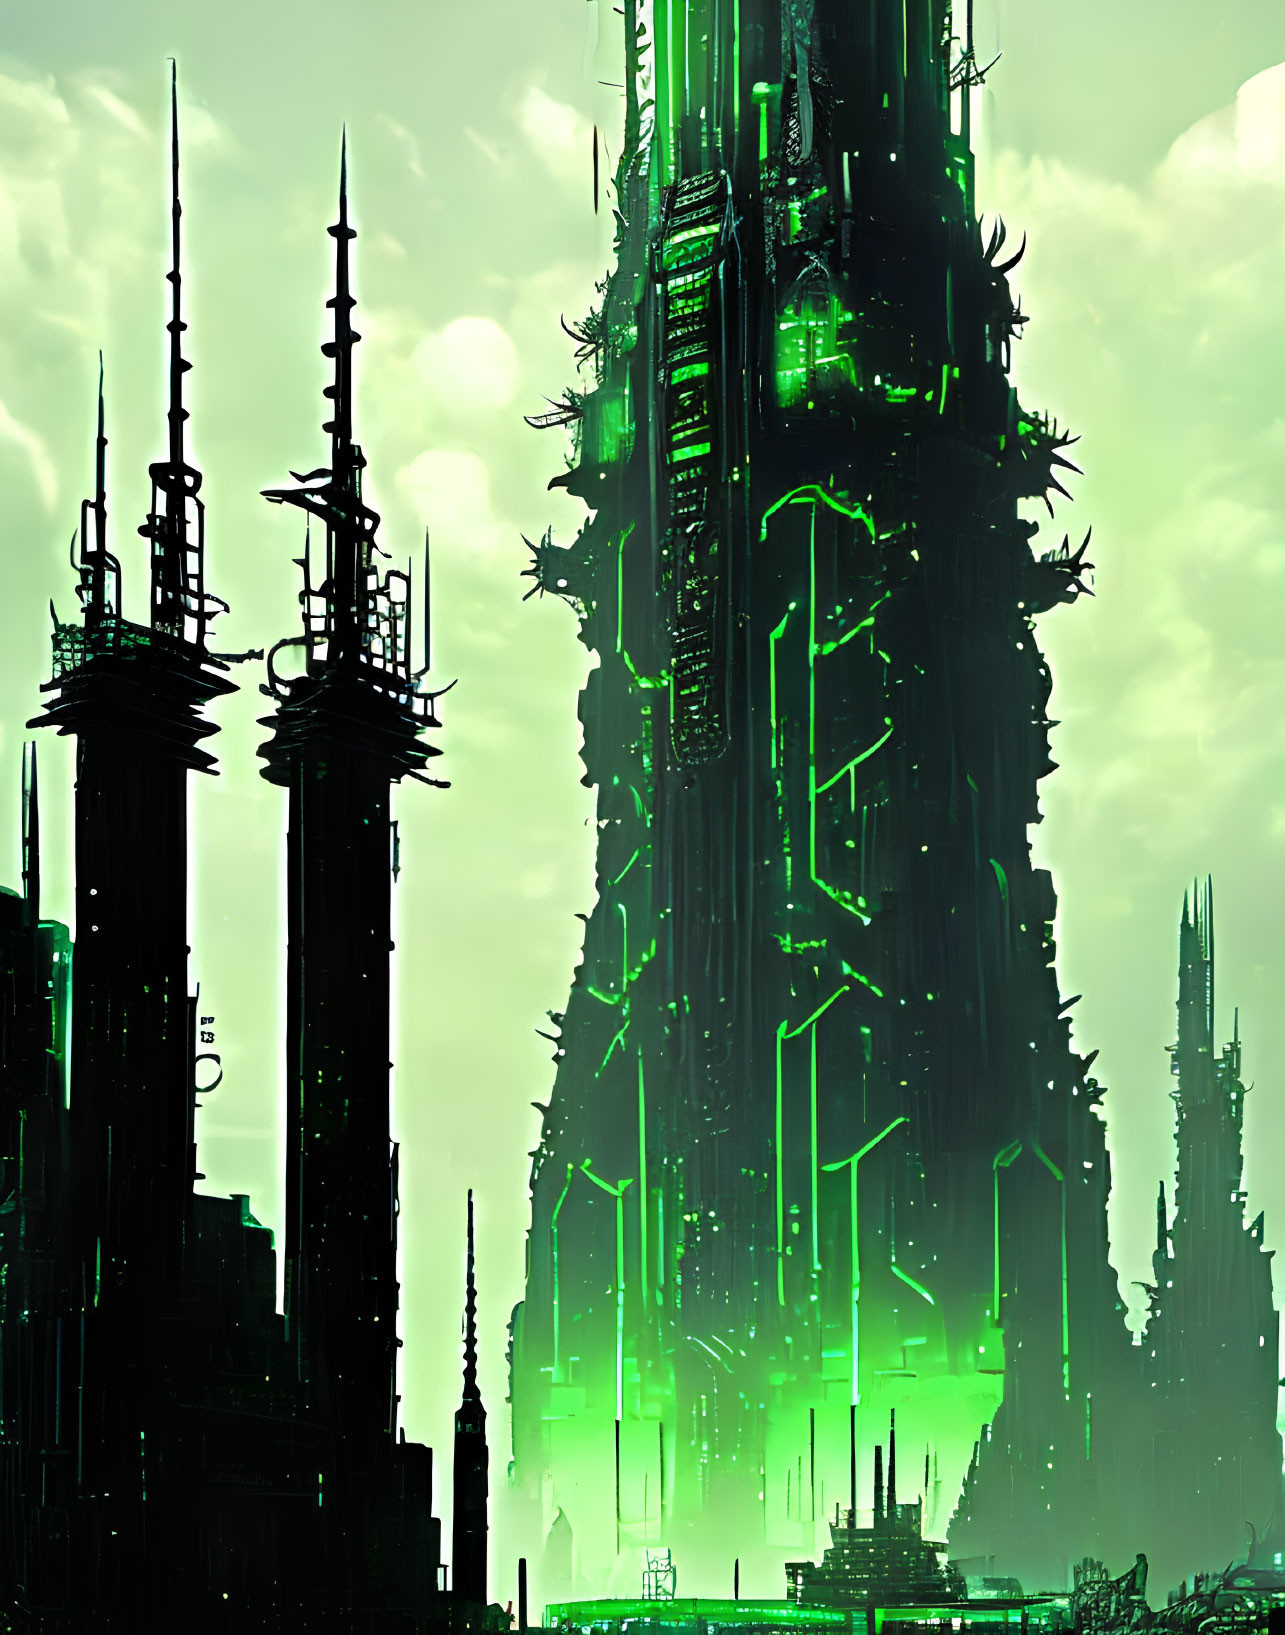 Futuristic cityscape with glowing green highlights and towering spires